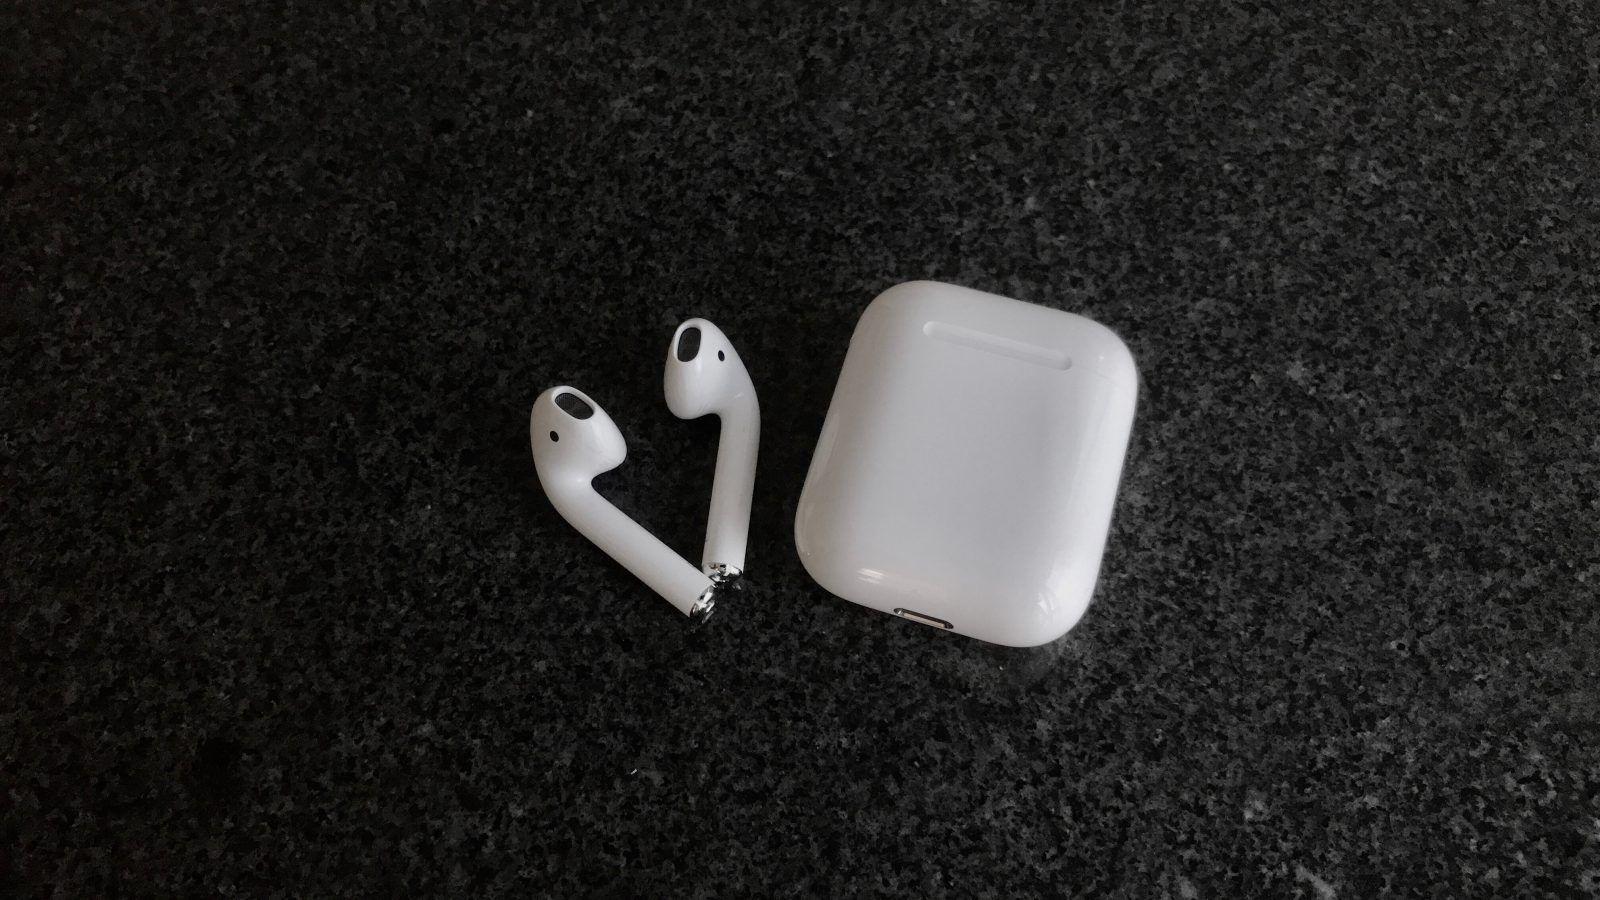 How to pair AirPods with Android, Apple TV, PC, older Macs, and more